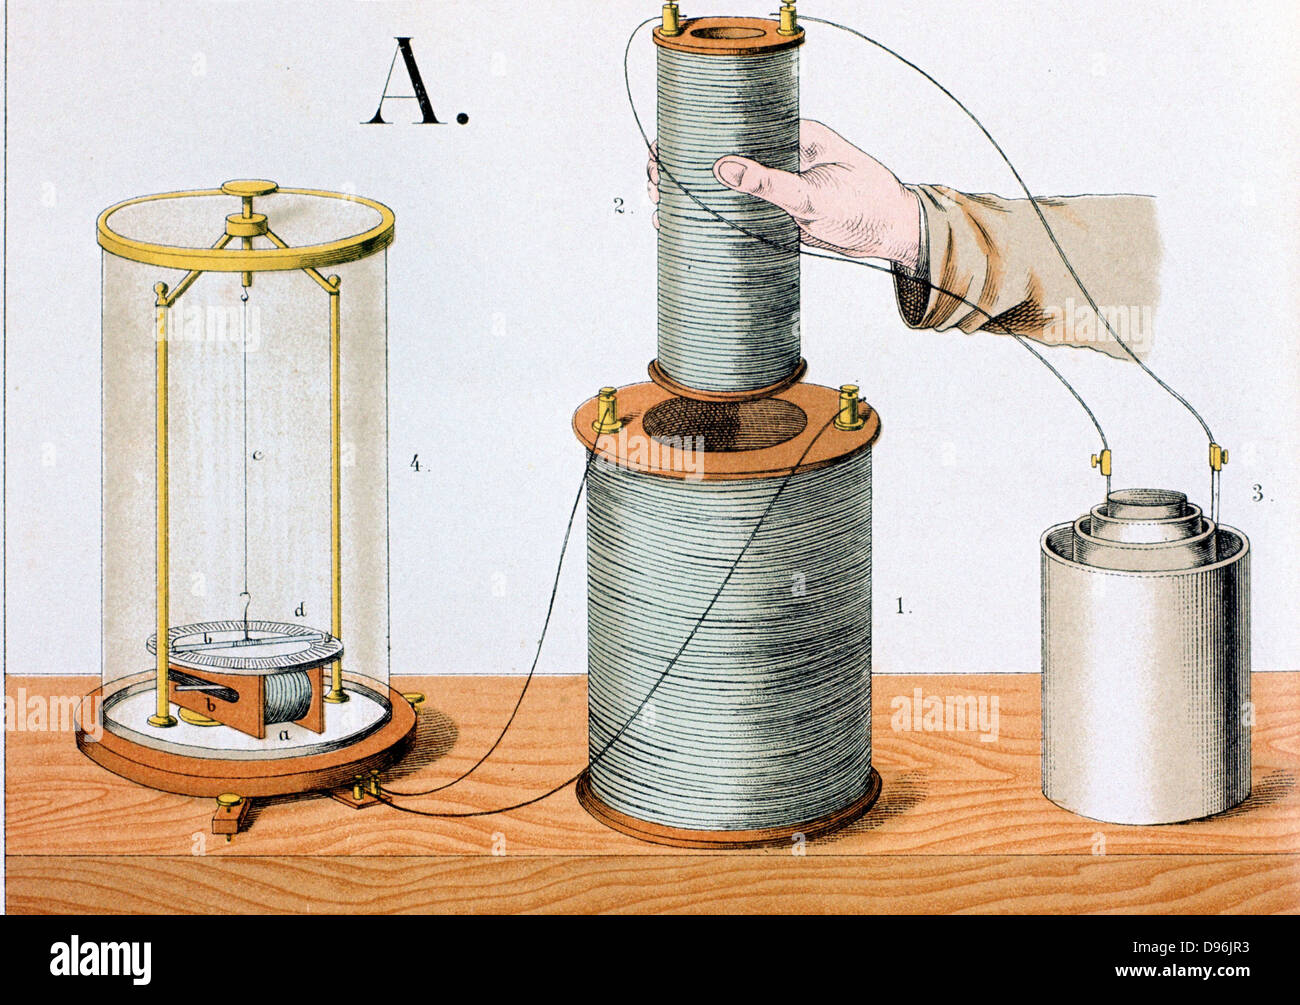 Faraday's experiment. Electromagnetic induction: inner coil connected to liquid battery, outer coil to galvanometer. Print published London 1882. Stock Photo